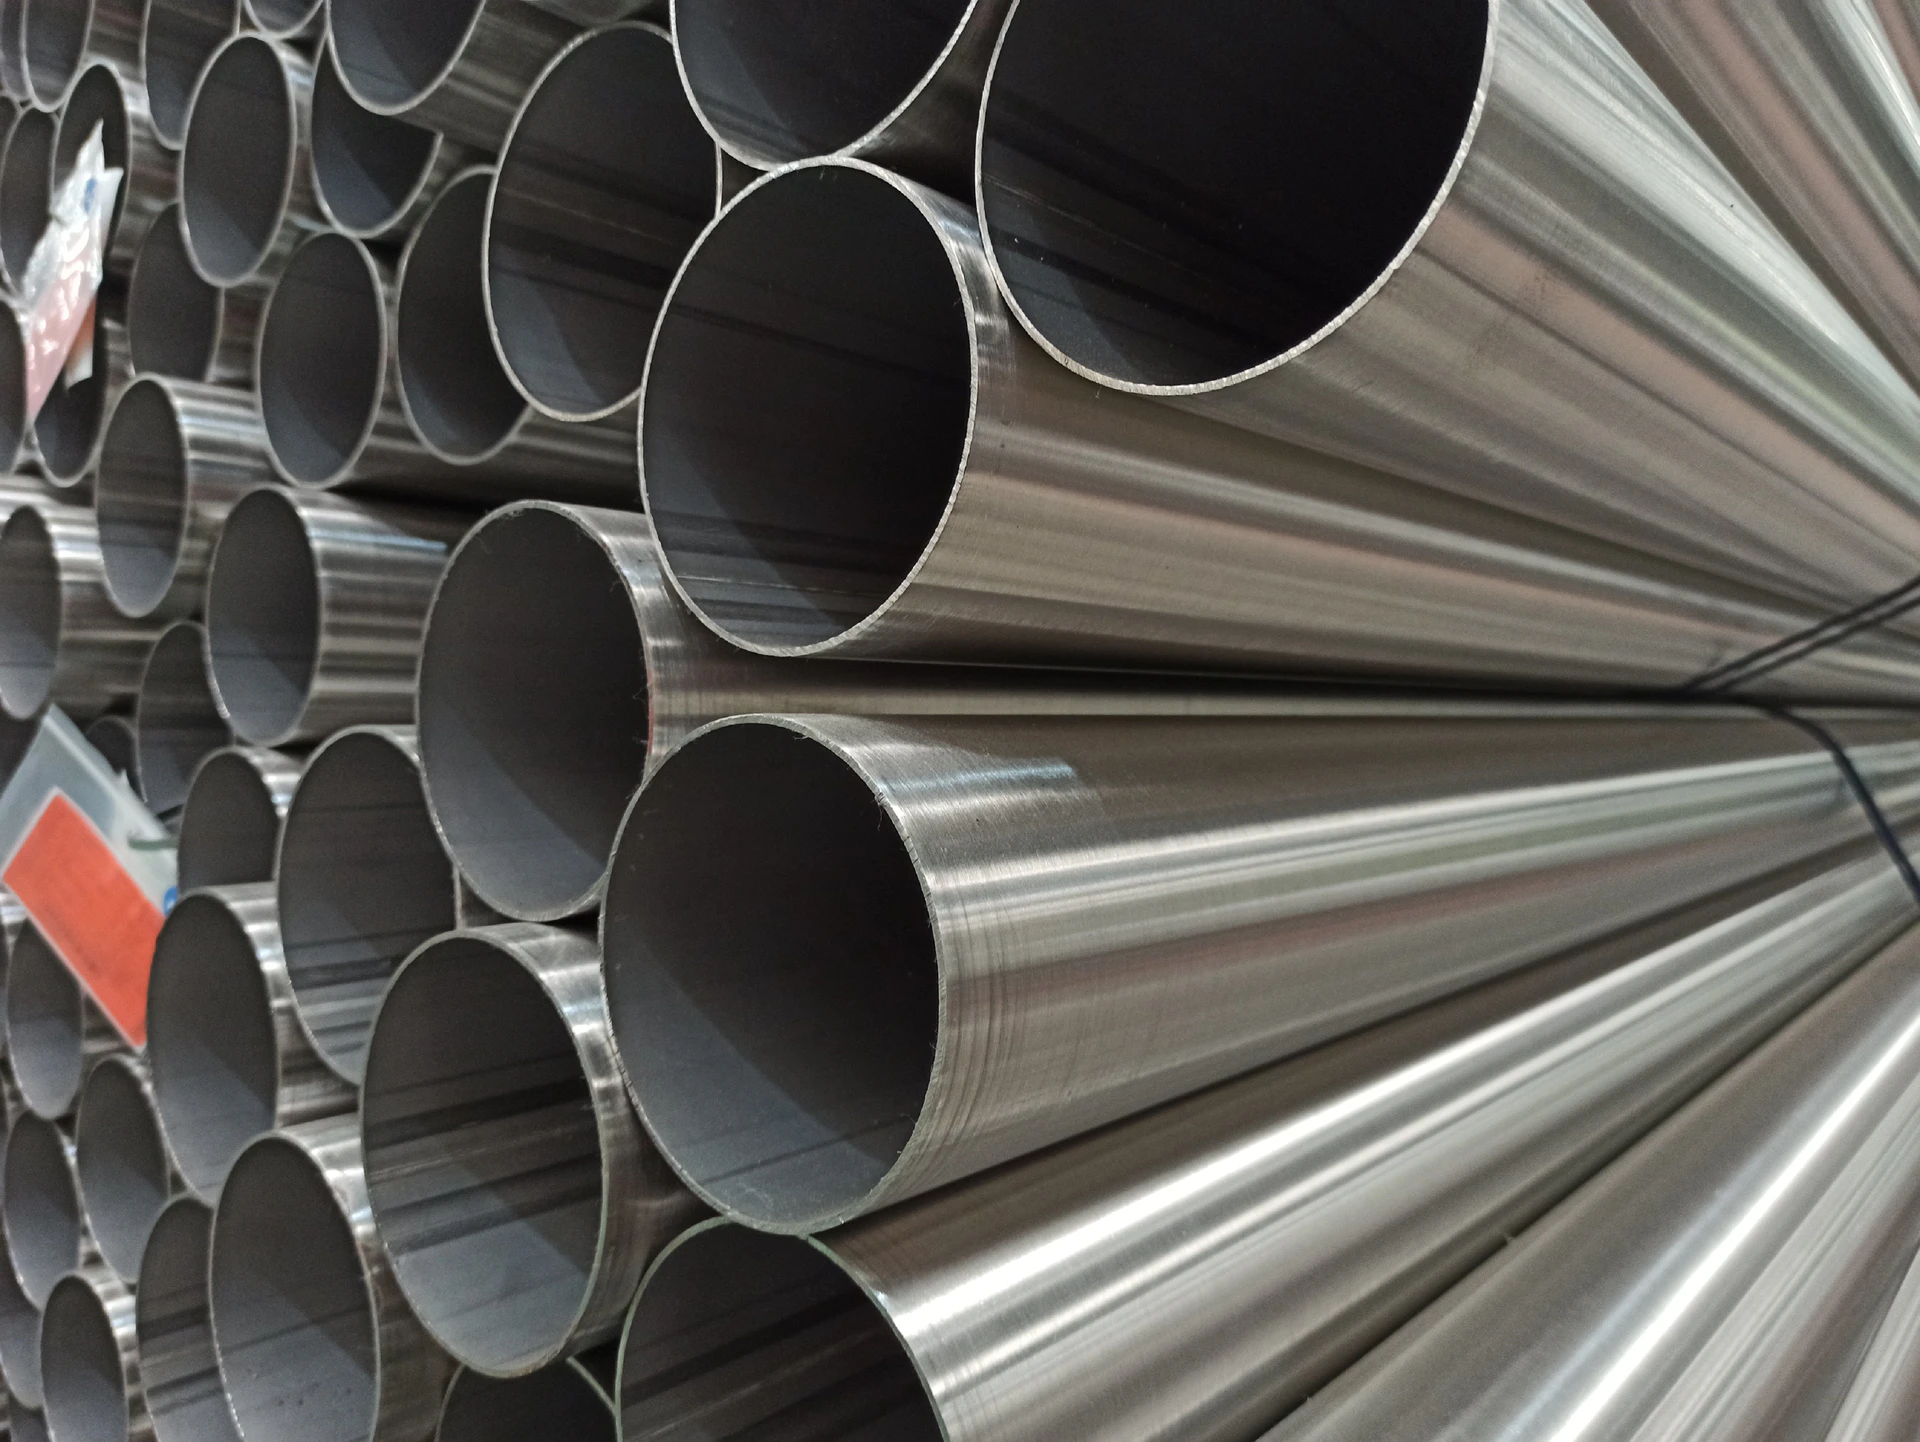 China guangzhou Mayer 304 stainless steel tubes